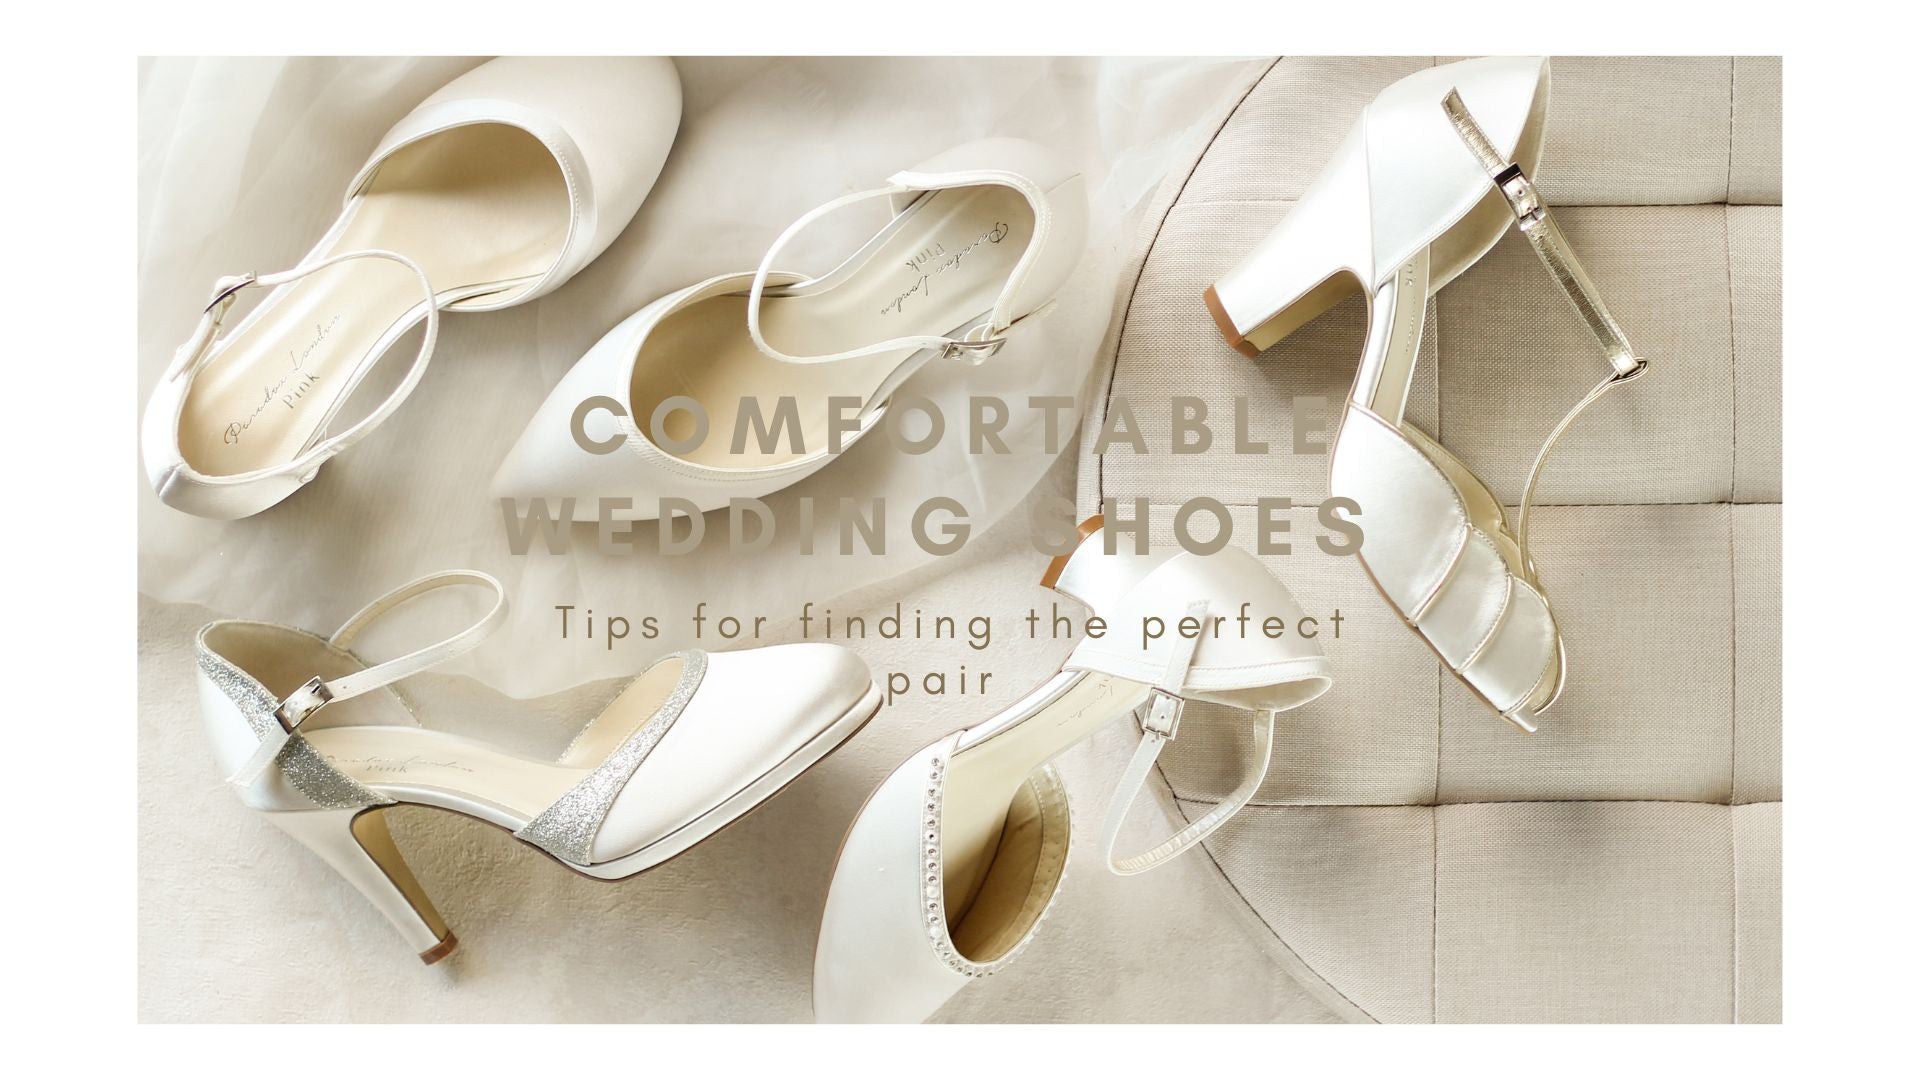 Comfortable Wedding Shoes: Tips for Finding the Perfect Pair